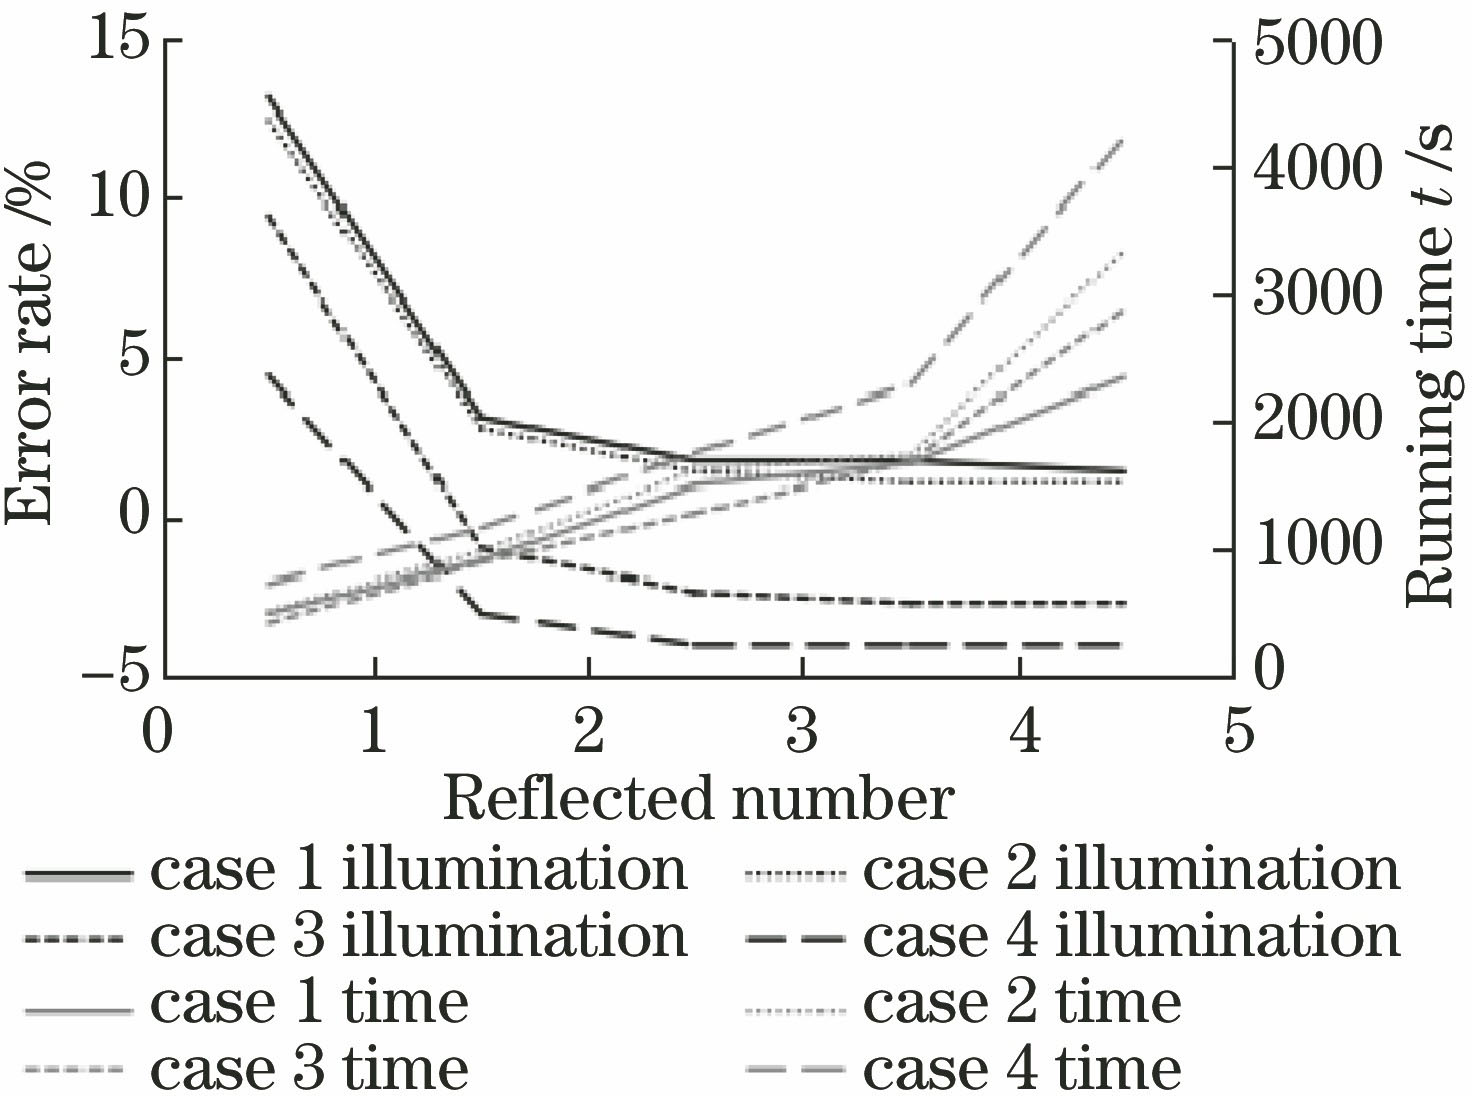 Average illuminance error rate and running time versus number of reflection calculations